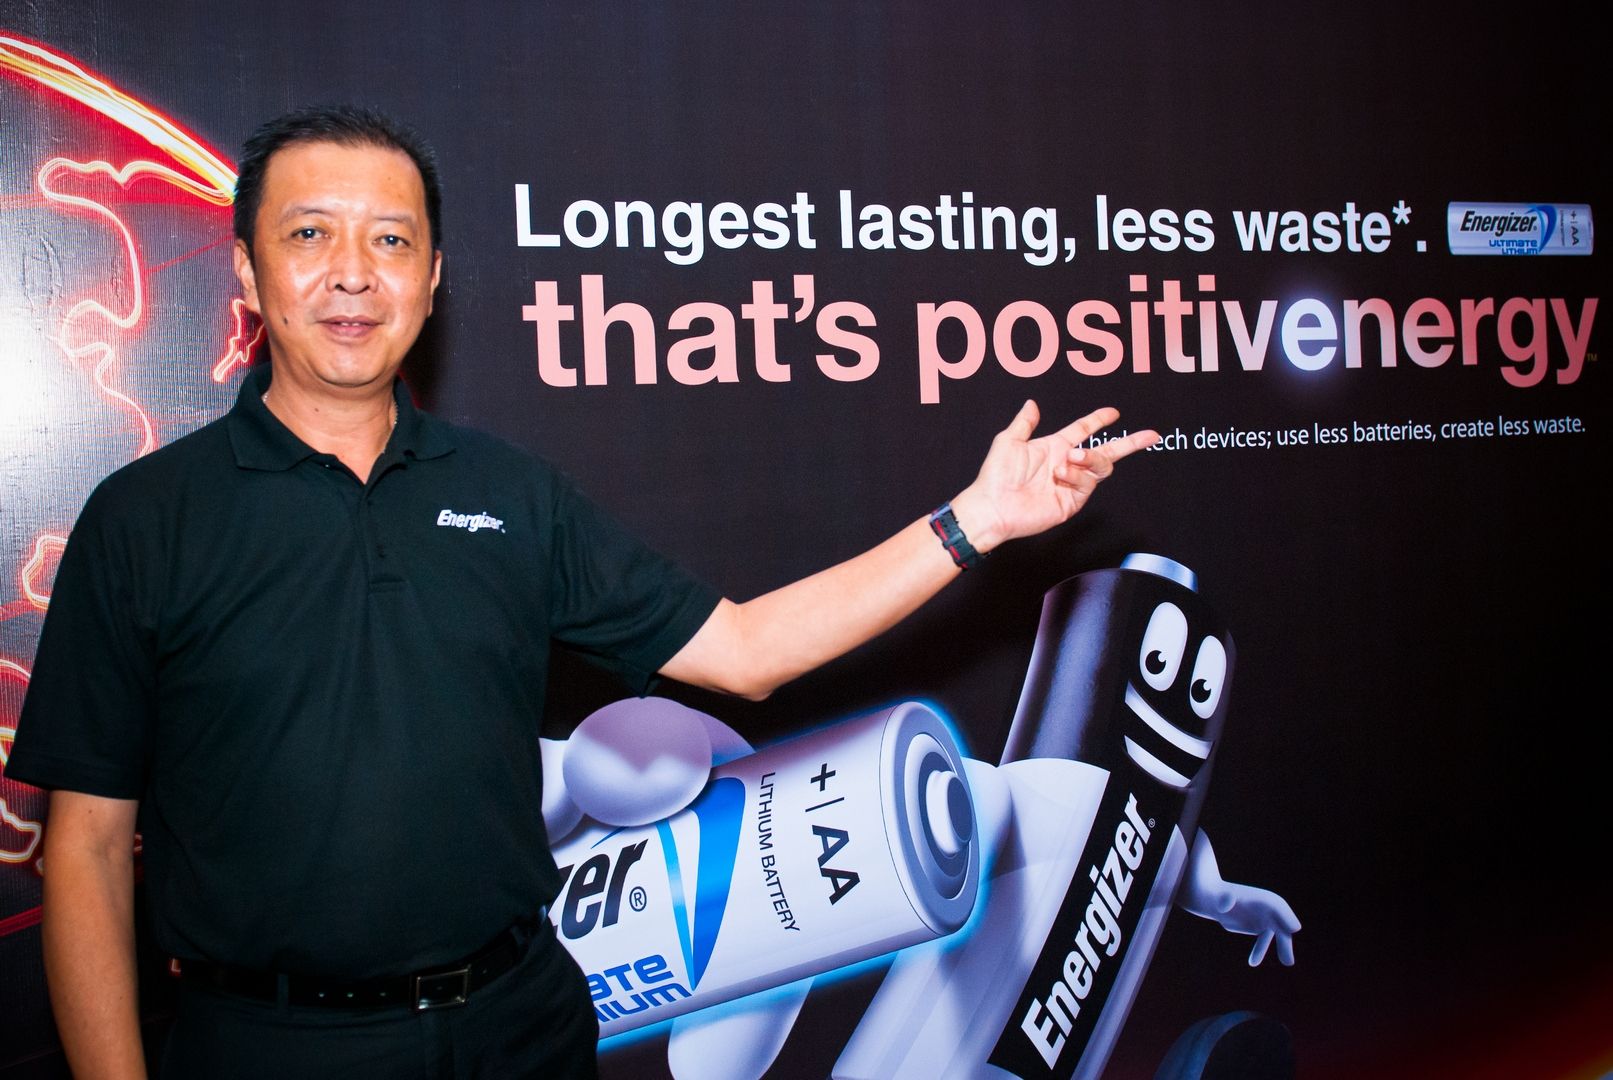 Mike Foong, Managing Director of Energizer Malaysia unveiling the company's new 'That's Positivenergy' global campaign that promises advanced consumer innovations and international events in the near future.